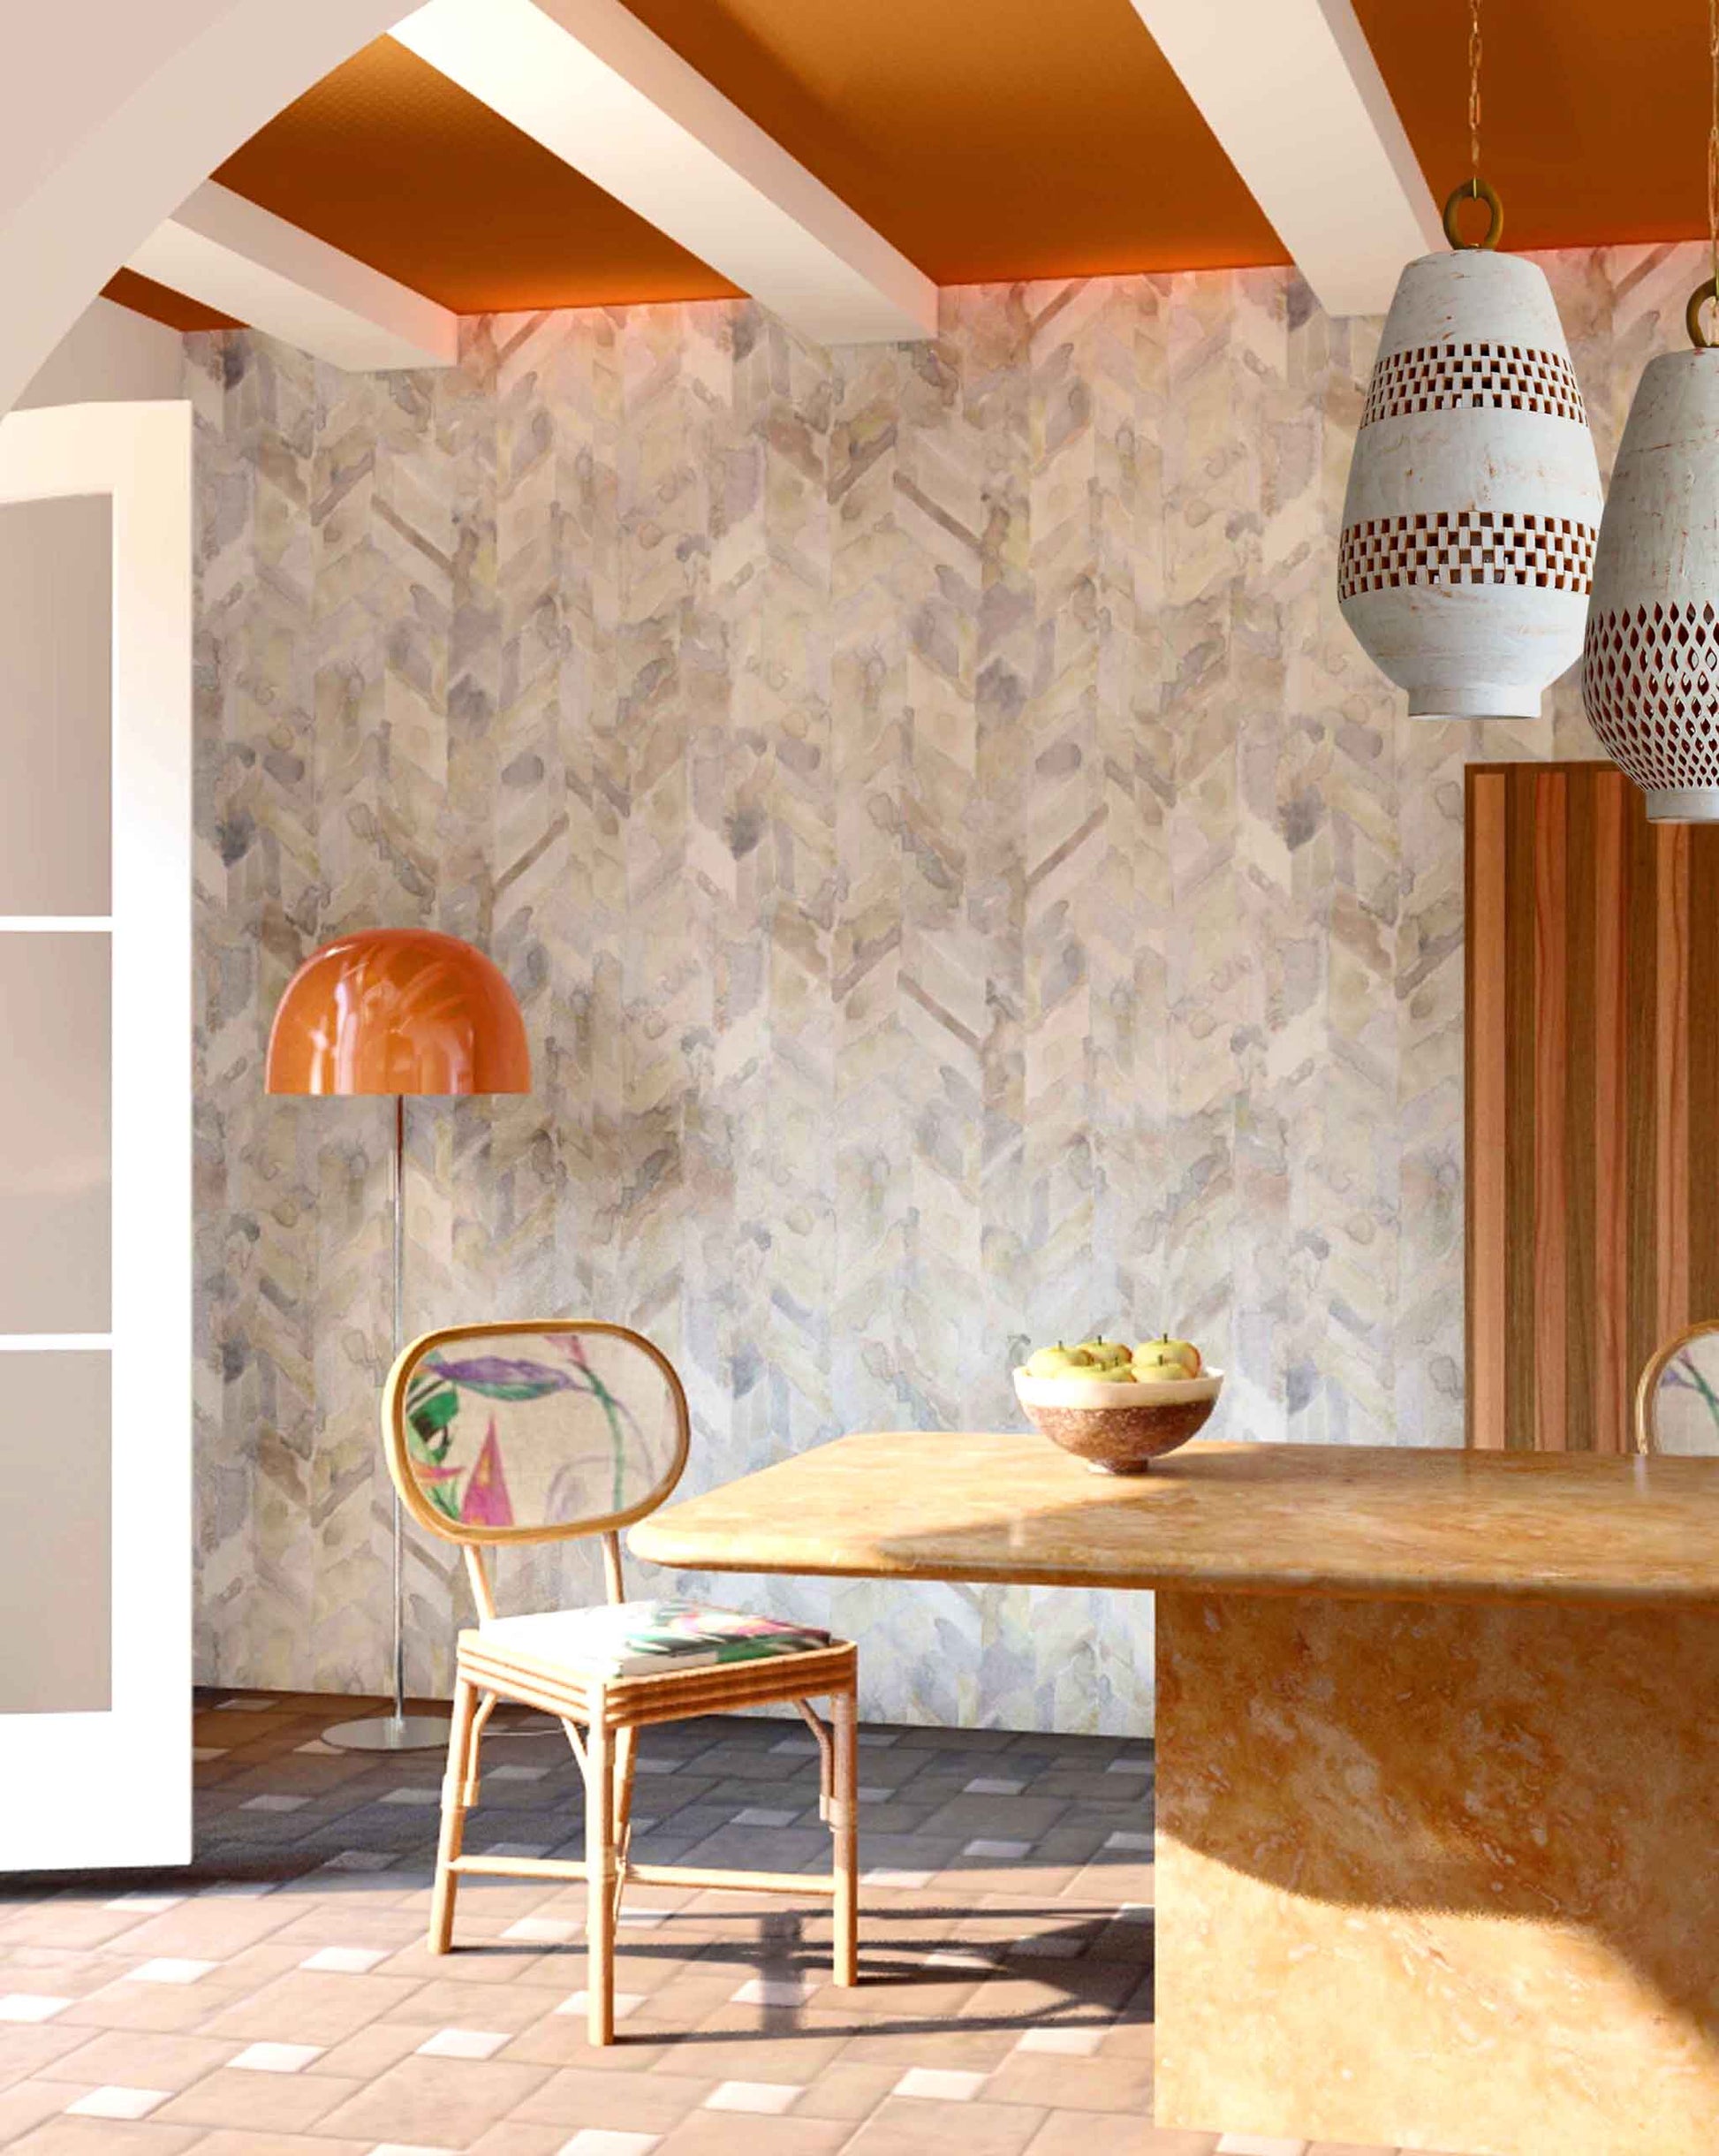 A dining room with a wooden table from the Sorisa Wallpaper Sol collection